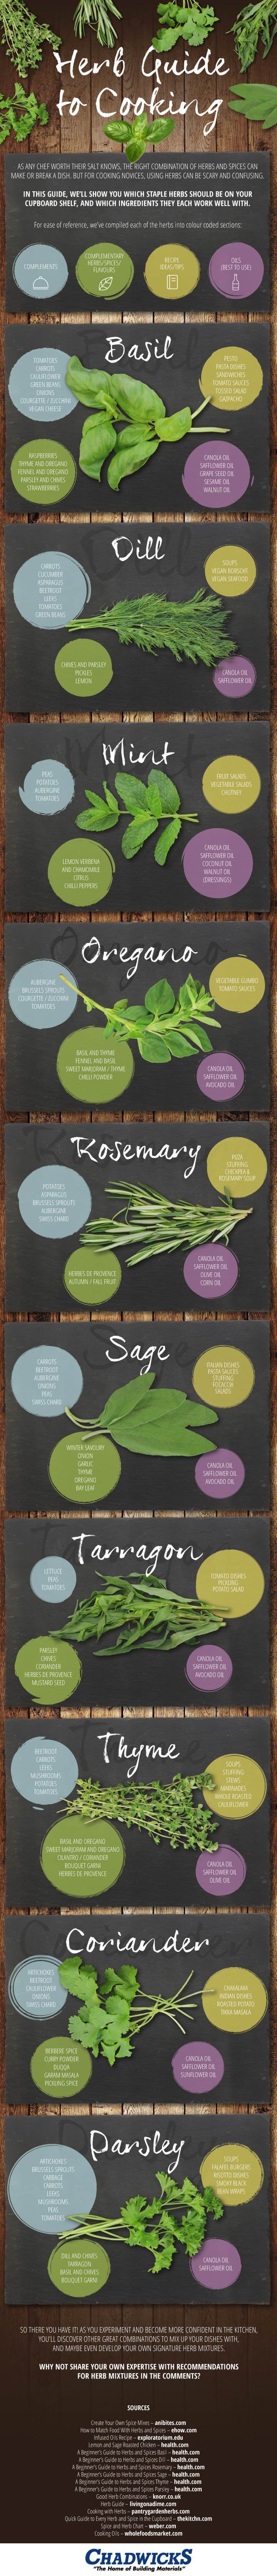 A-Herb-Guide-to-Cooking